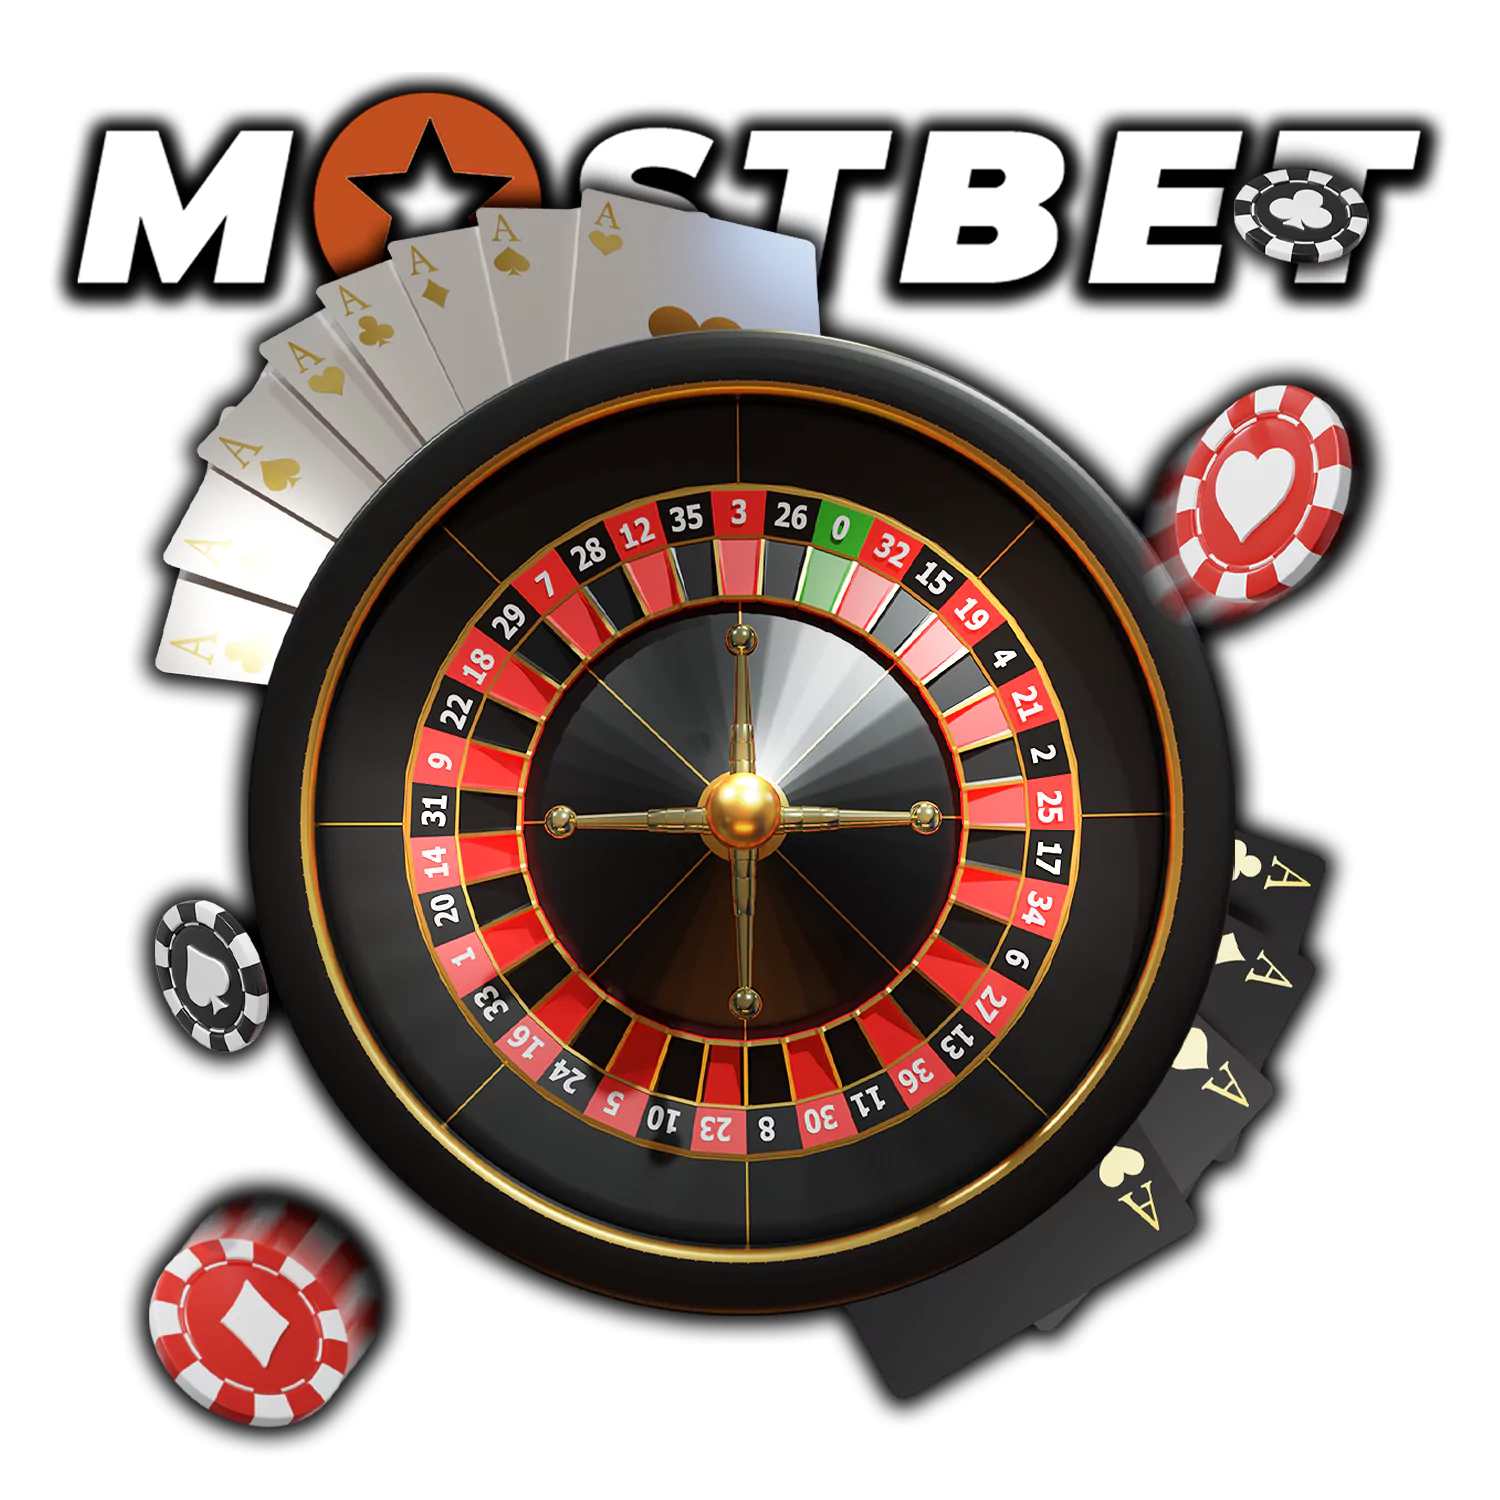 Learn how to play roulette at Mostbet on the site or in the app.